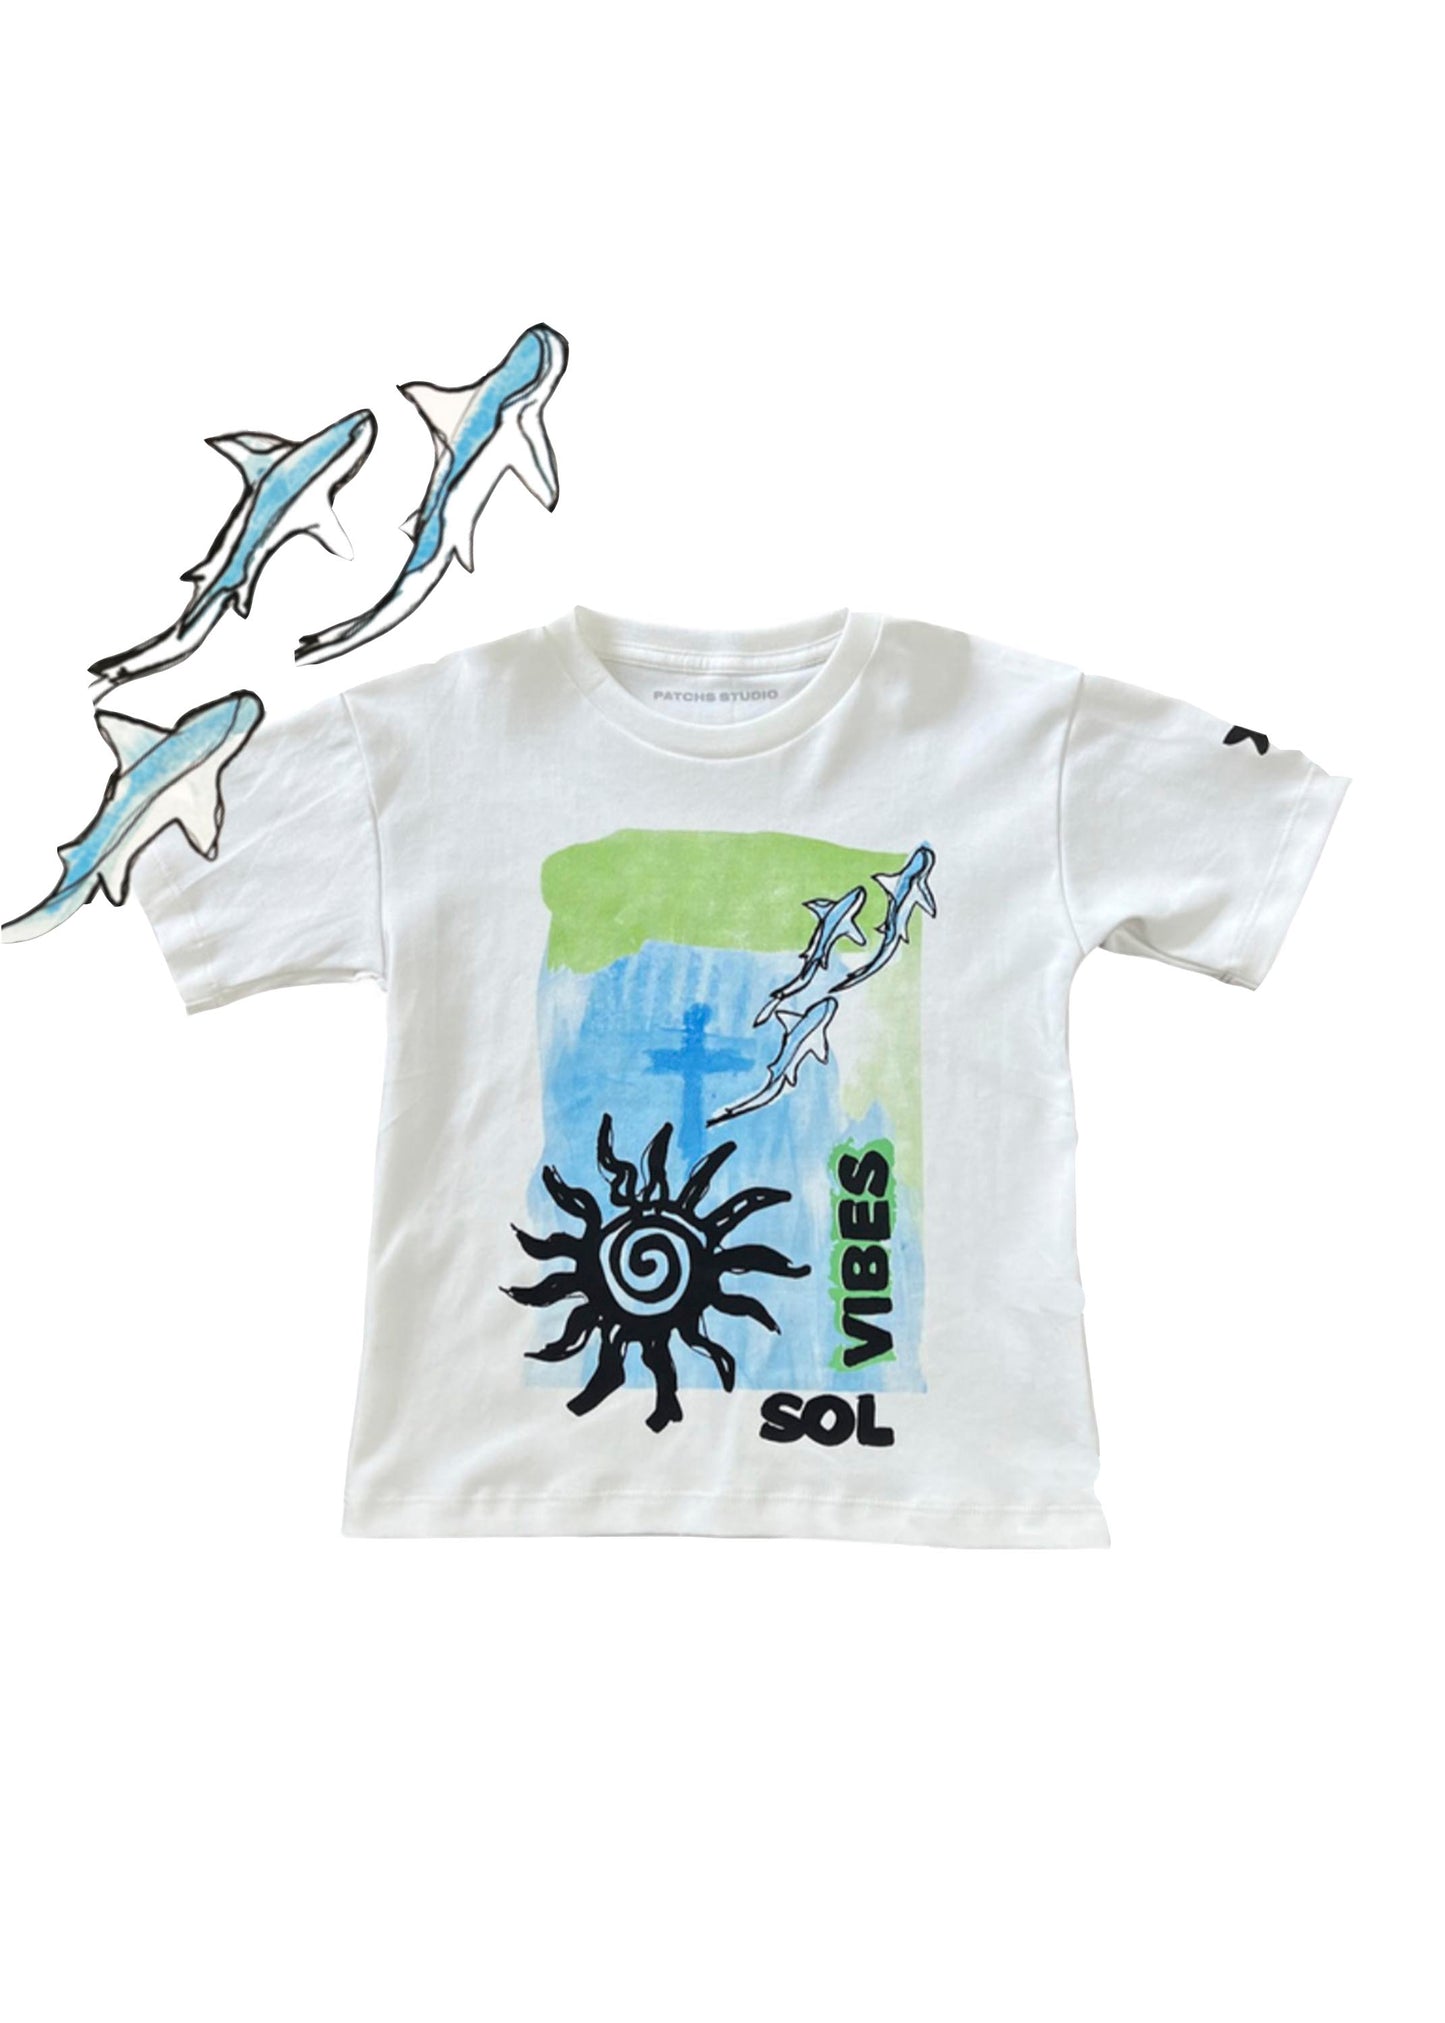 Patchs Studio - Sol Vibes Kids Tee, Off White